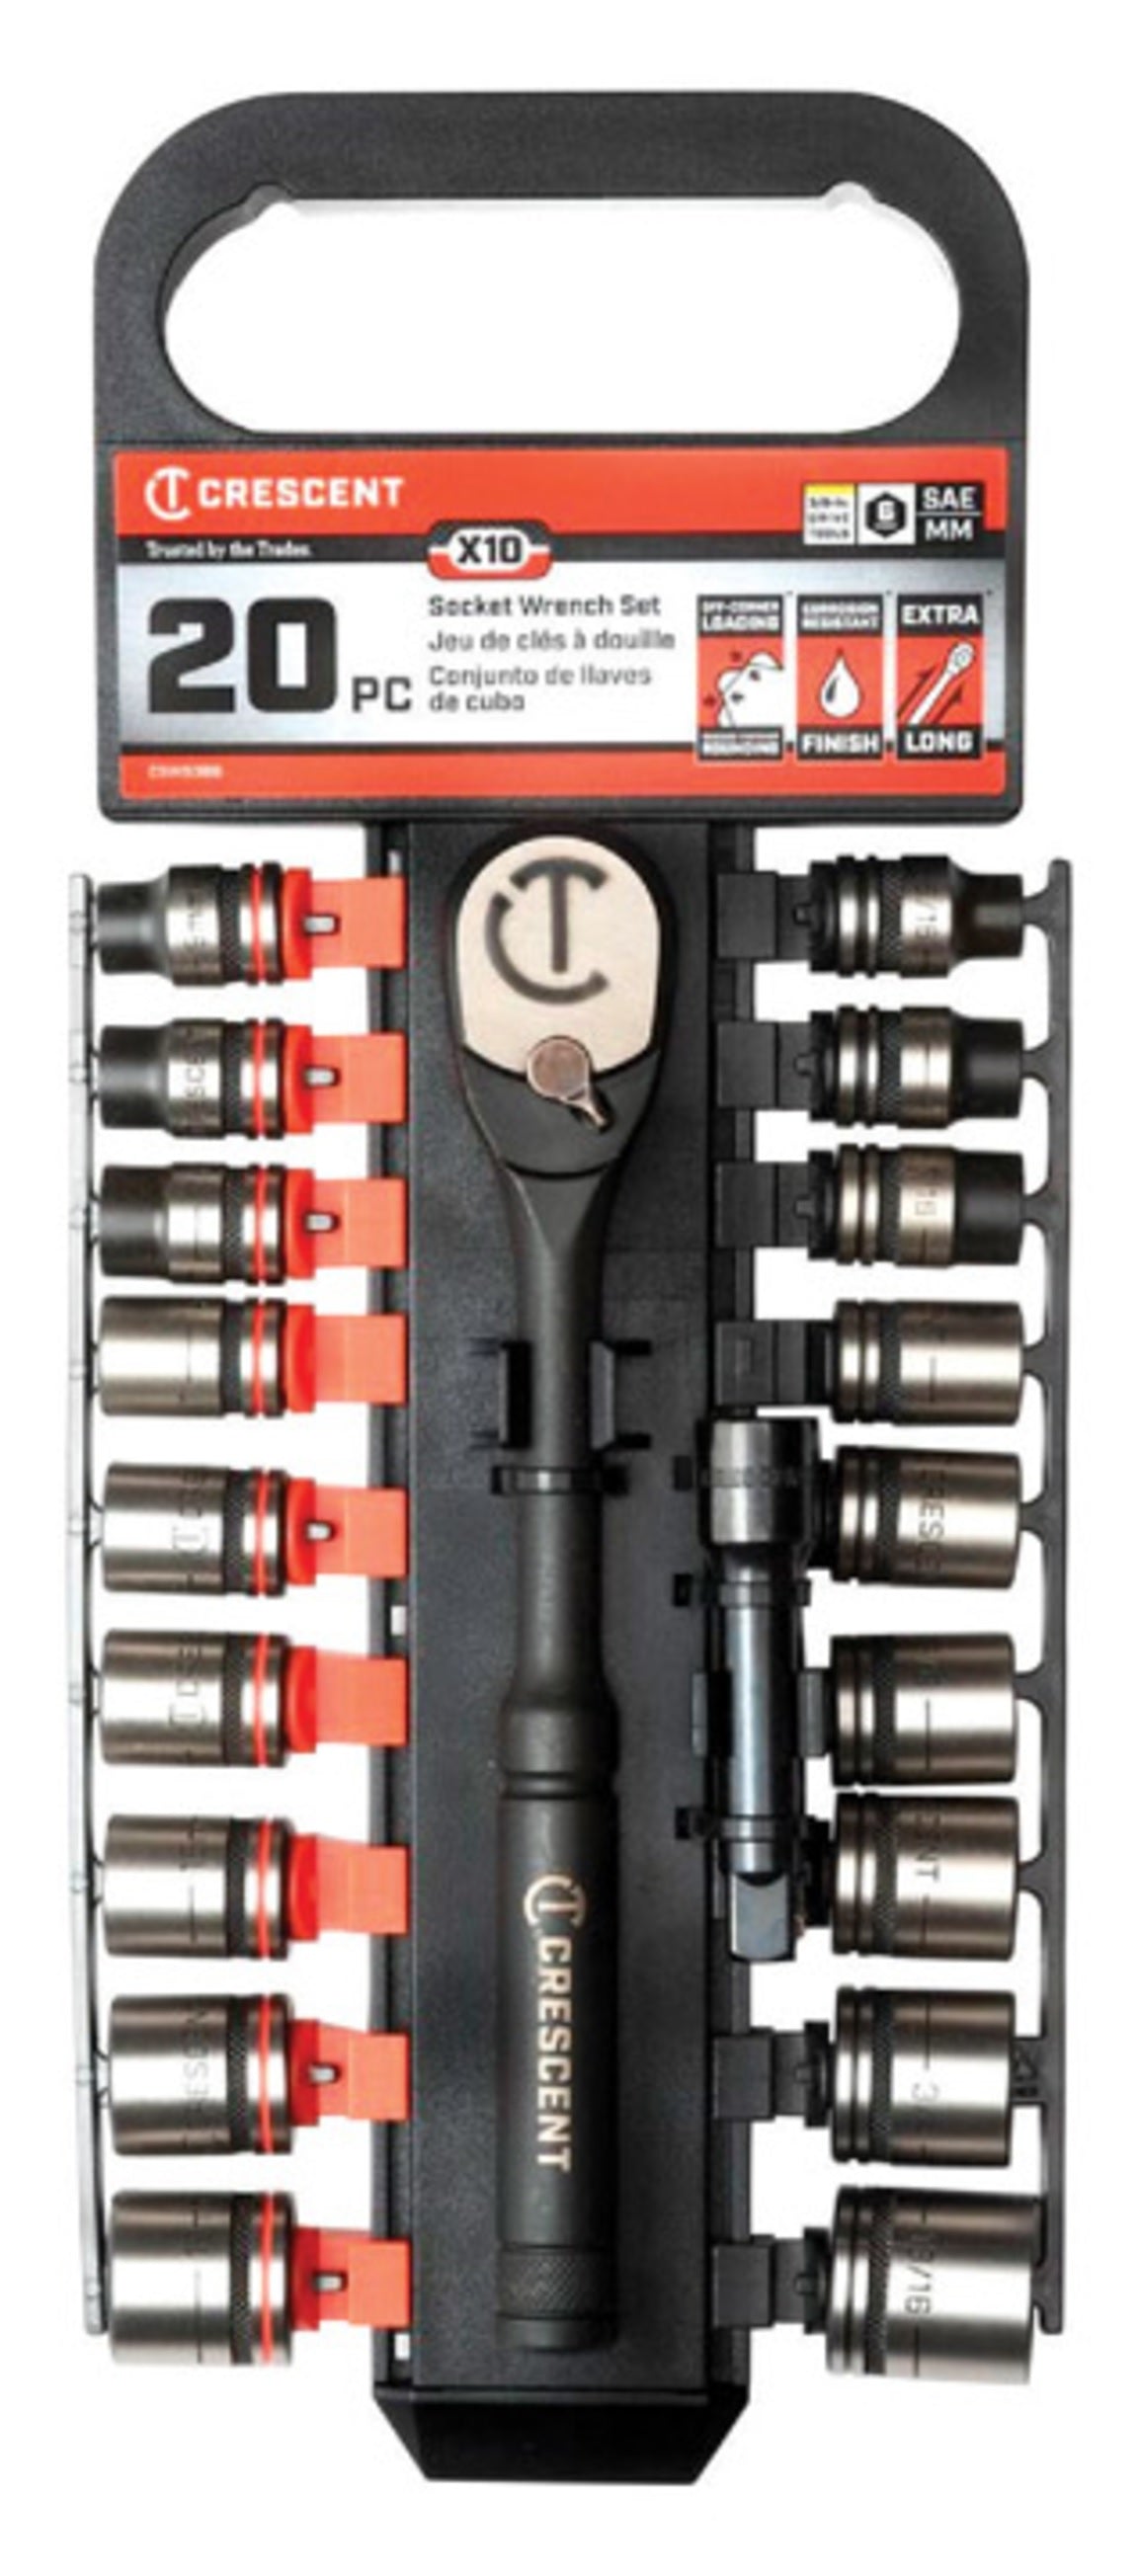 Crescent CSWS14B X10 Metric and SAE Socket Wrench Set, Black Oxide